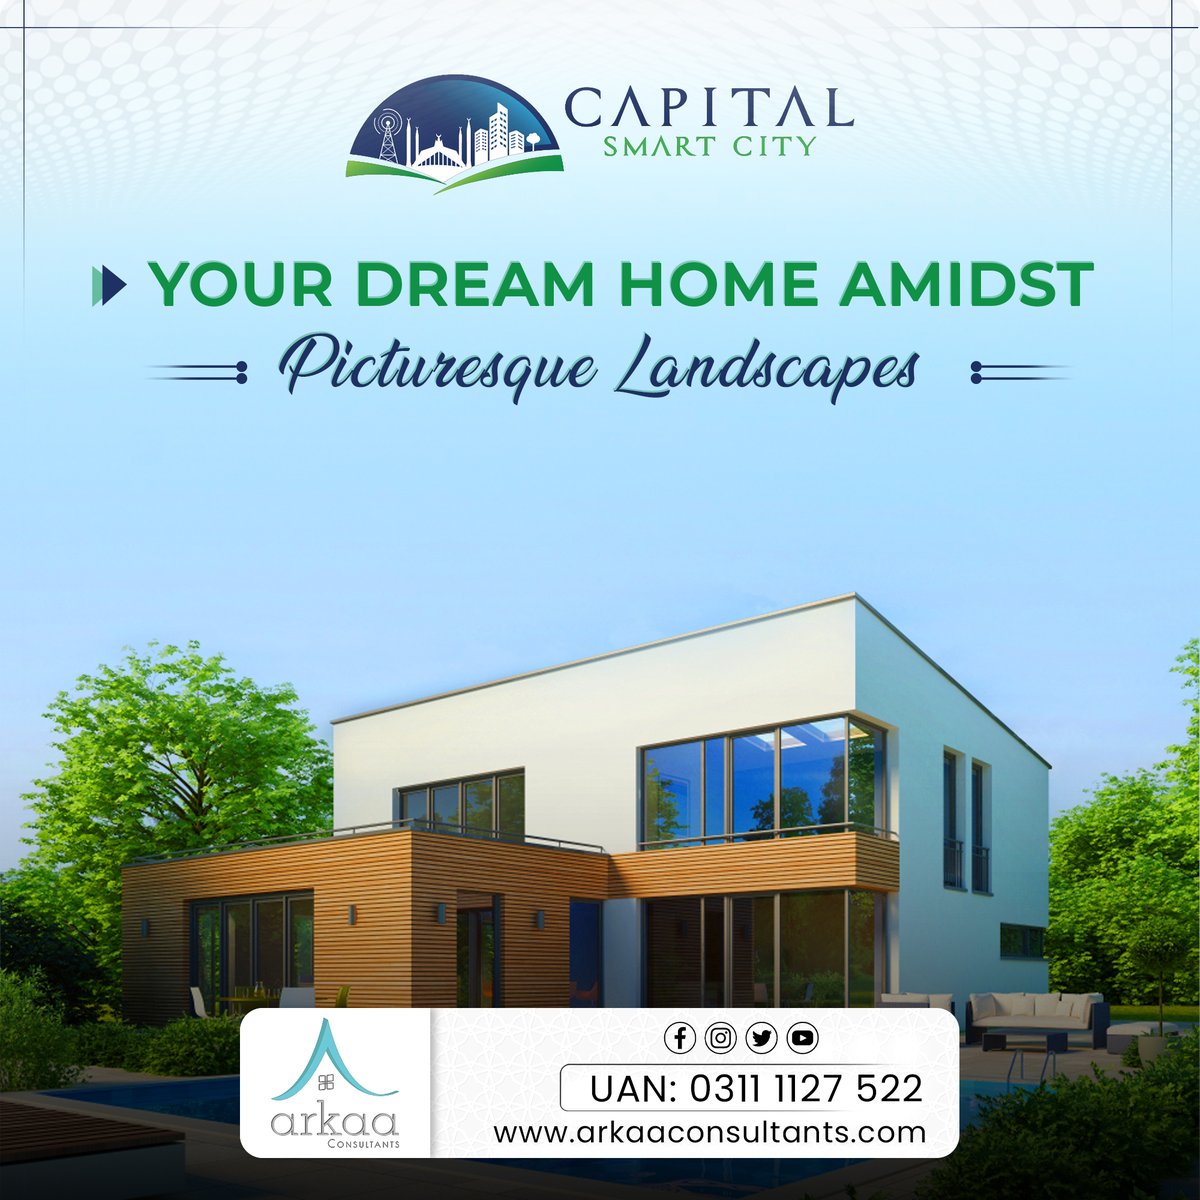 Imagine your dream home nestled amidst picturesque landscapes at CSC.

#capitalsmartcity #arkaaconsultants #smartinterchange #SmartCities #CSC #experiencethedifference #csc #islamabad #investment #CapitalSmartCityIslamabad #dreamhomegoals #picturesqueview #amazinglandscapes